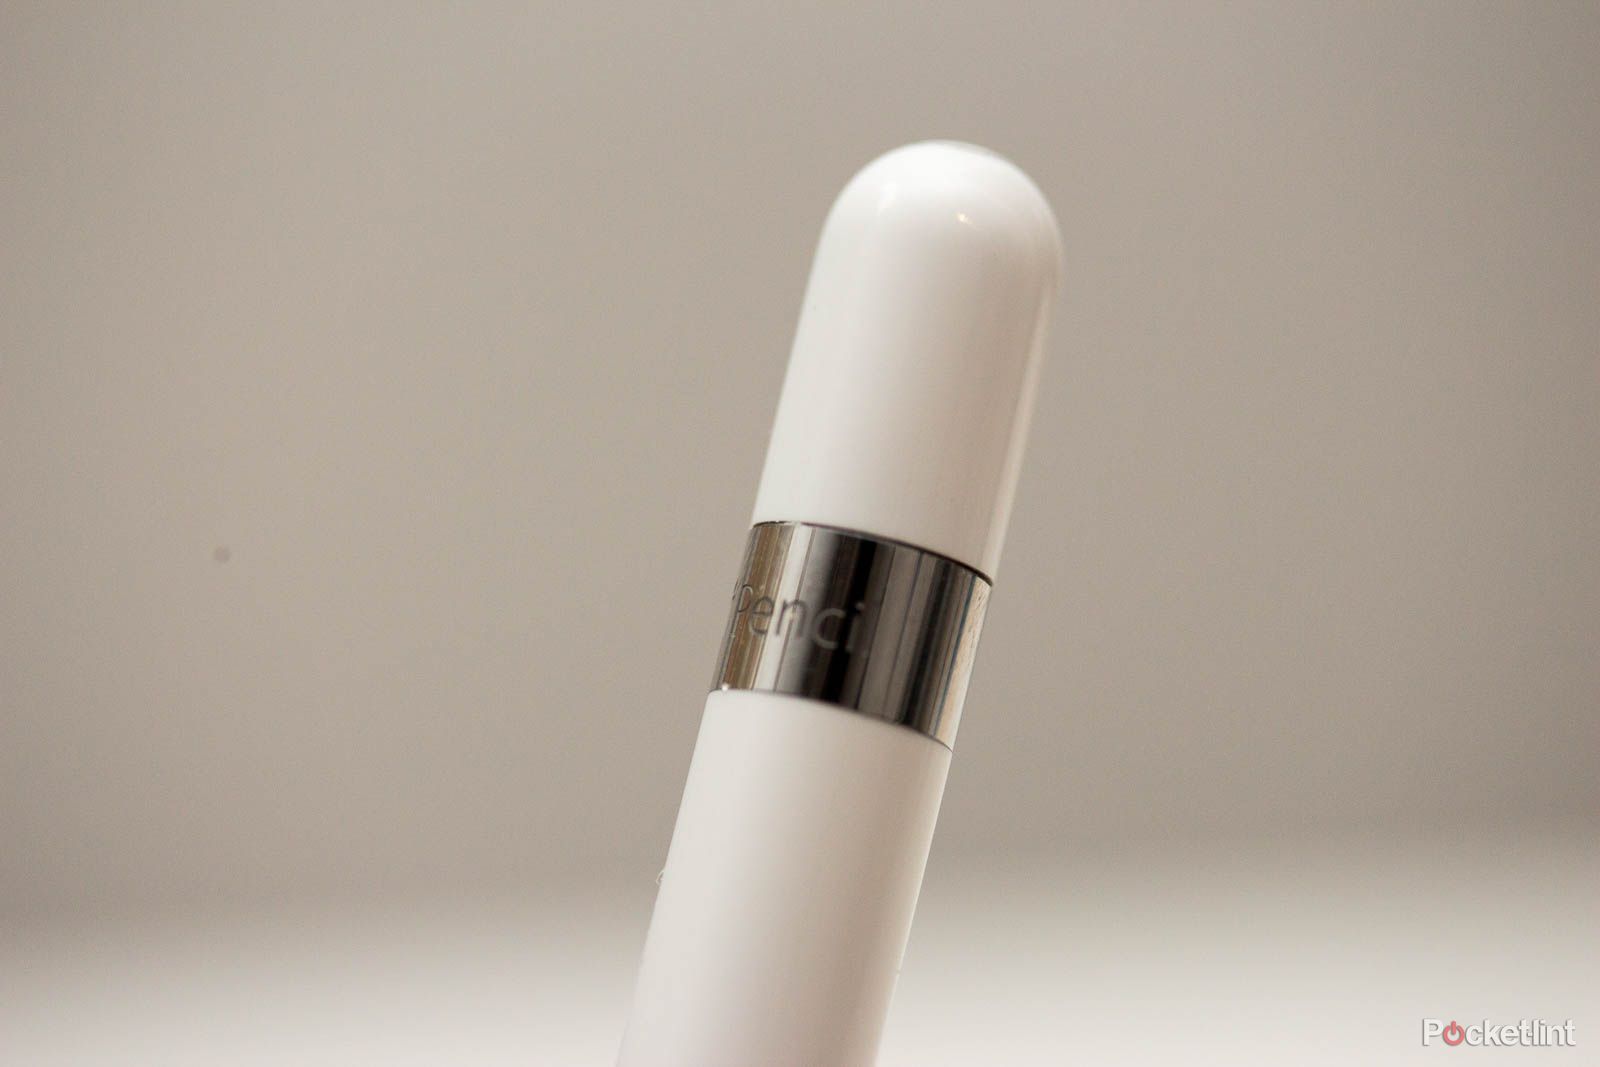 Rare deal alert Save 20 on the first Apple Pencil image 1